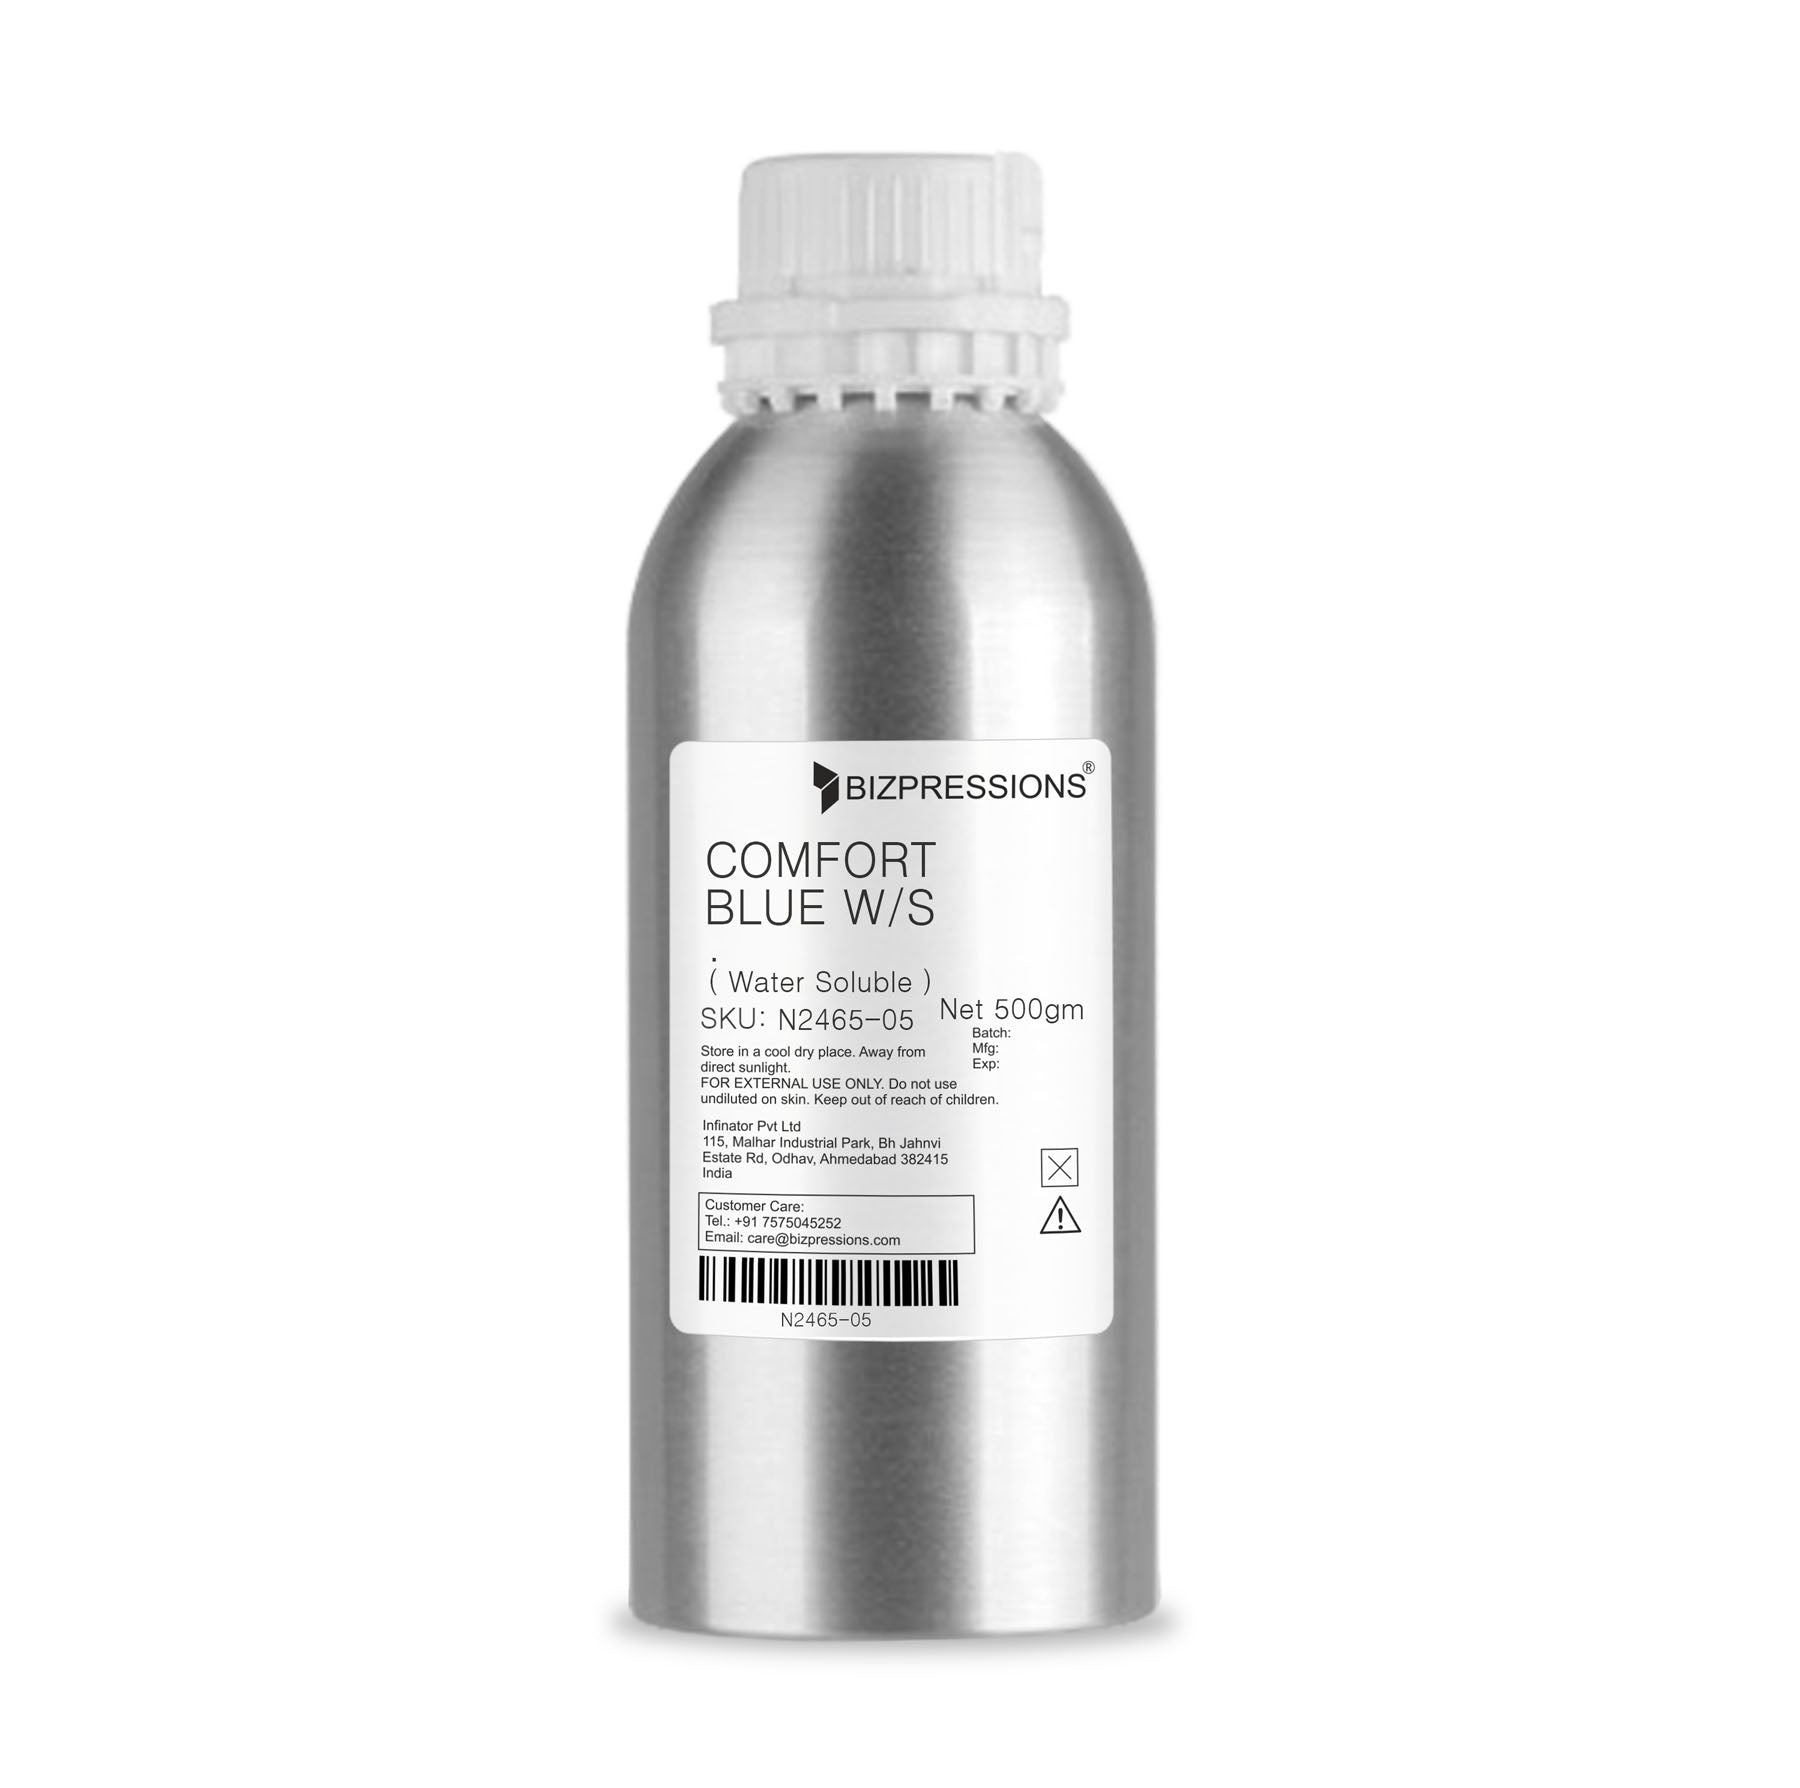 COMFORT BLUE W/S - Fragrance ( Water Soluble ) - 500 gm